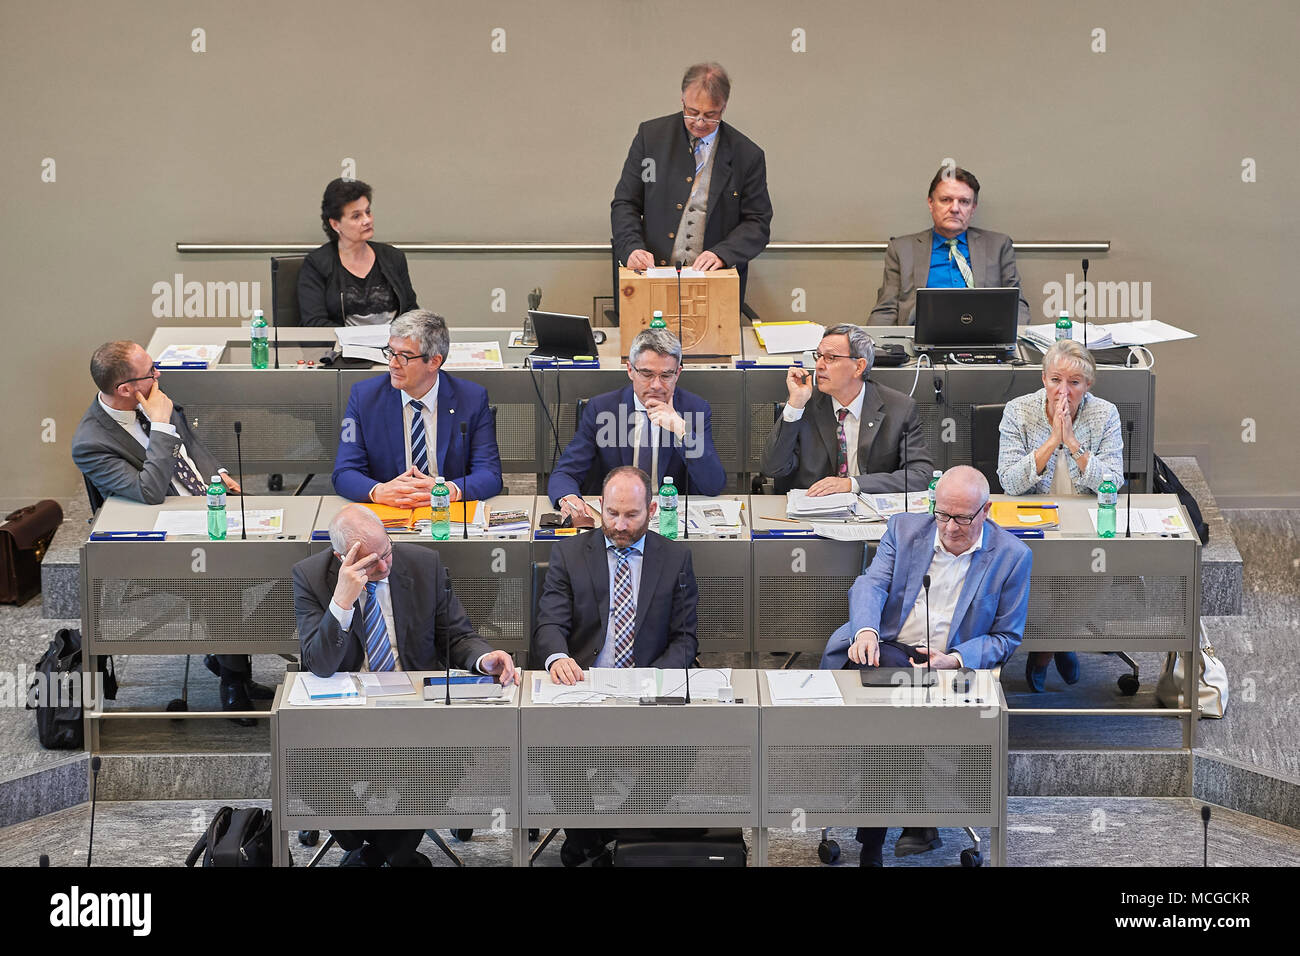 Chur, Switzerland, 16th April 2018. President of the parliament Martin Aebli during his opening speech at the April 2018 session in the Grand Council of the Canton of Grisons in Chur. (Back row left to right: Tina Gartmann, Martin Aebli, Domenic Gross; Middle row left to right: Christian Rathgeb, Jon Domenic Parolini, Mario Cavigelli, Martin Jäger, Barbara Janom Steiner; Front row left to right: Roland Kunfermann, Kenneth Danuser, Adrian Steiger) Credit: Rolf Simeon/Alamy Live News Stock Photo